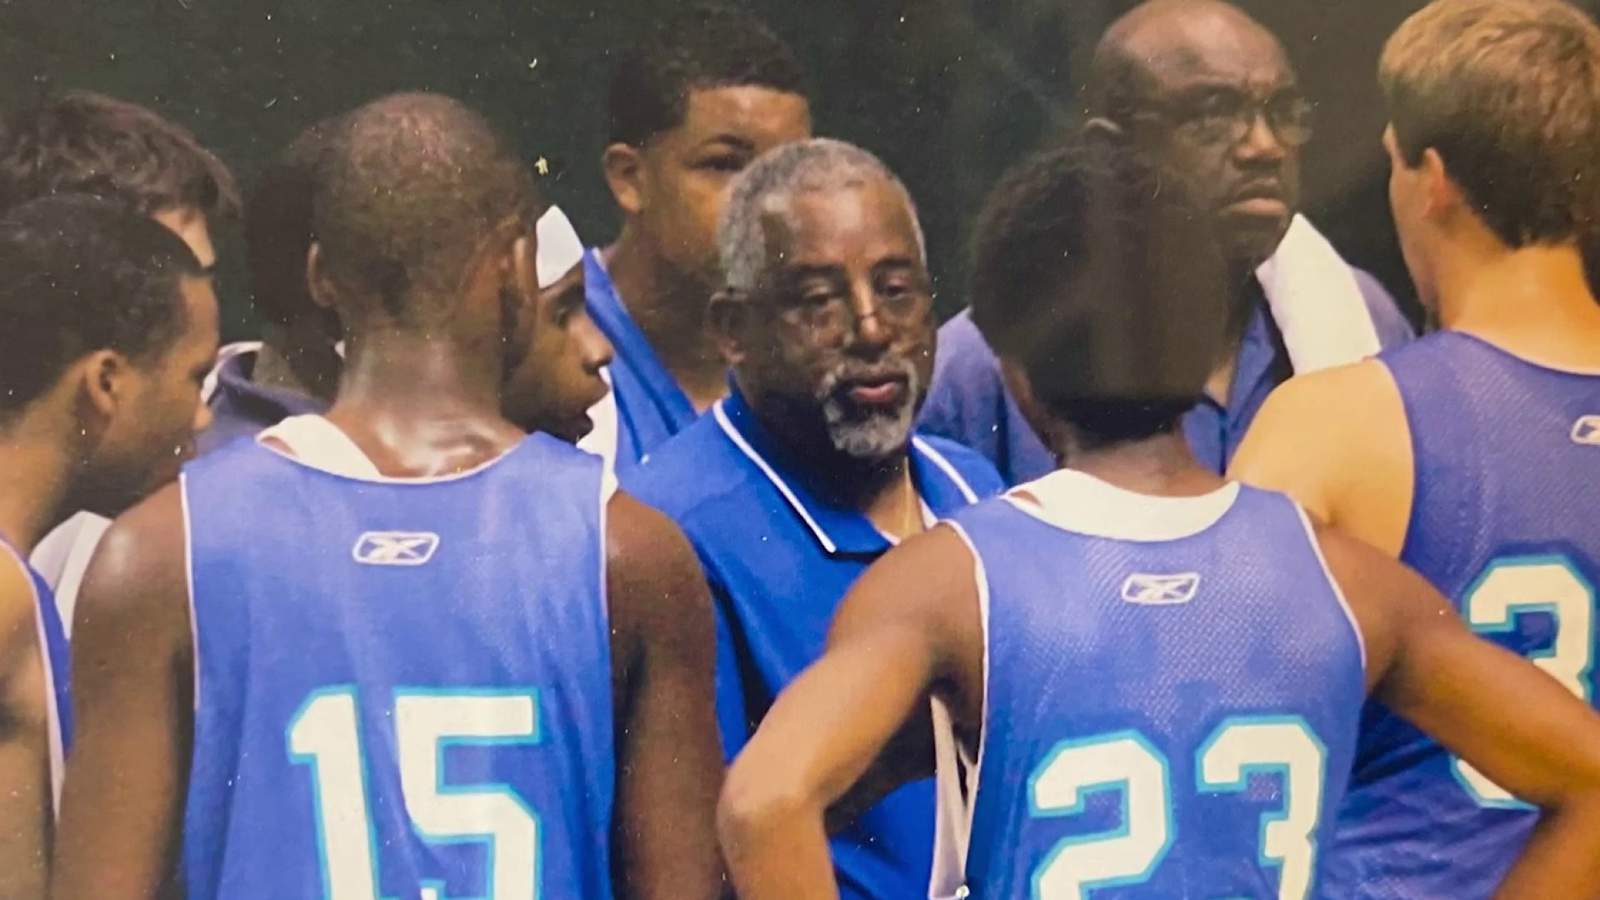 Orange County basketball coach and retired firefighter dies from COVID-19